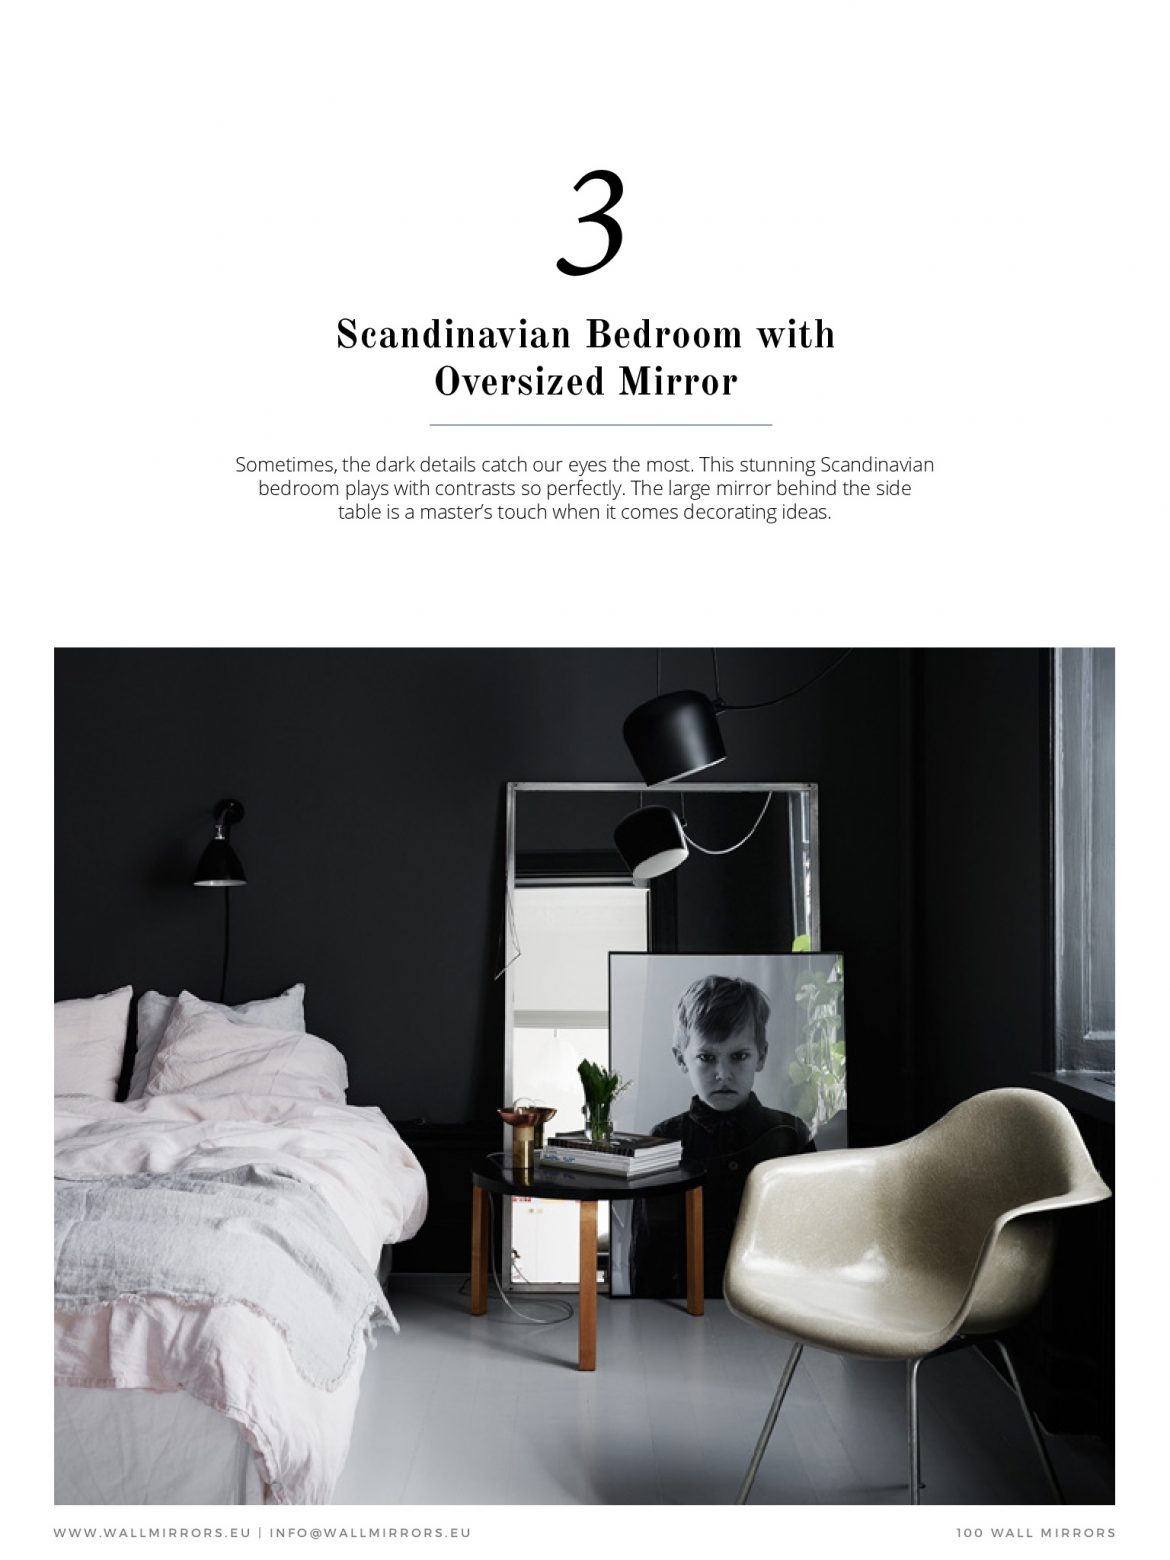 Explore The Unique 100 Must-see Wall Mirrors Ebook ➤To see more interior design ideas and the best shops visit us at http://interiordesignshop.net #interiordesign #salonedelmobile #isaloni @interiordesignshop